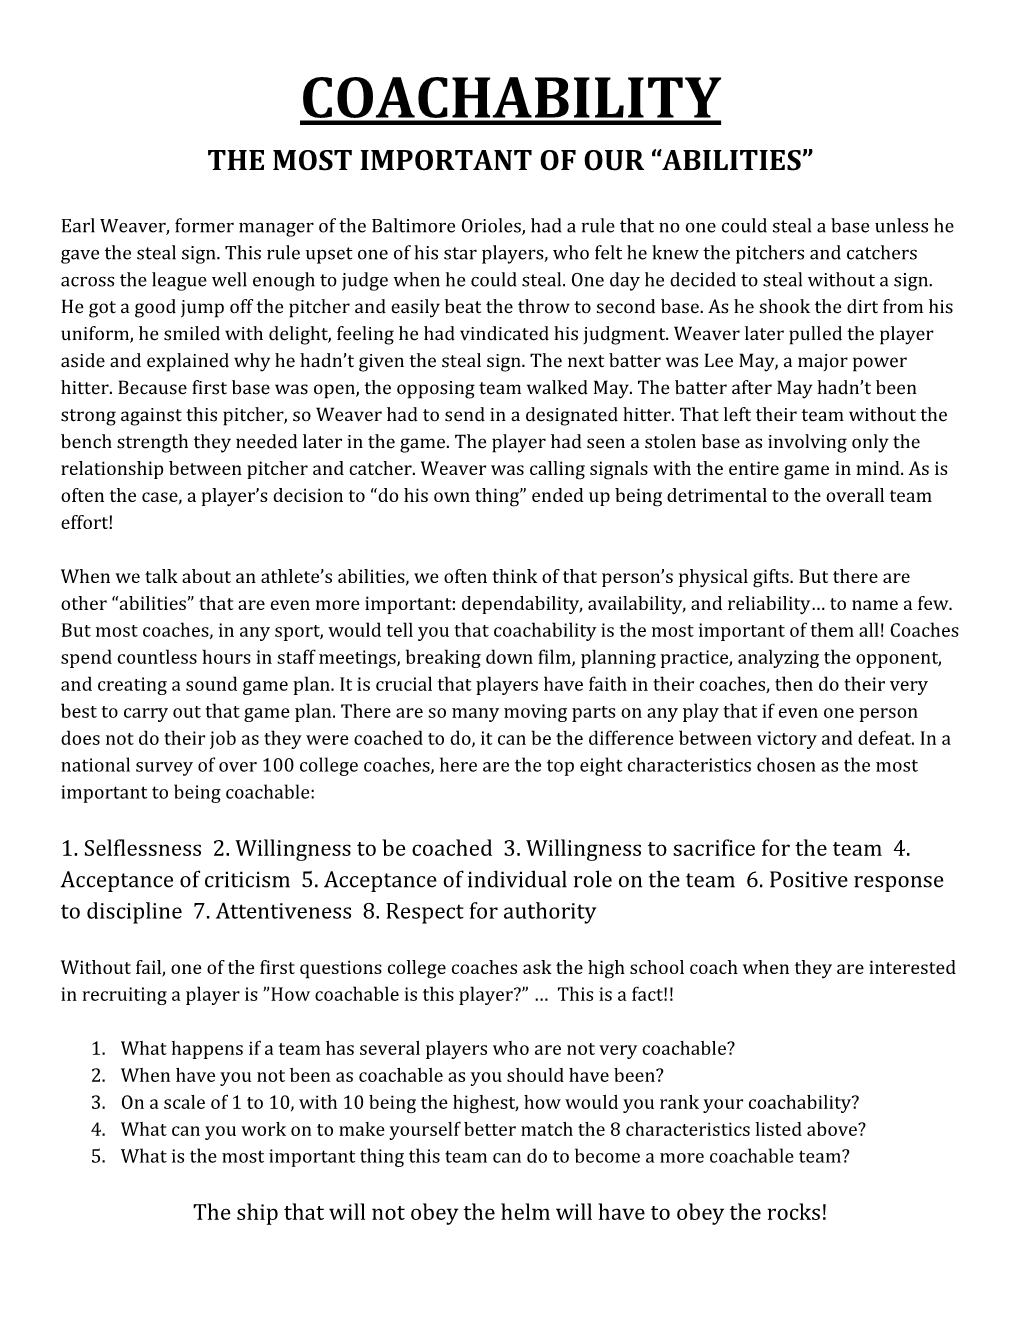 Coachability the Most Important of Our “Abilities”